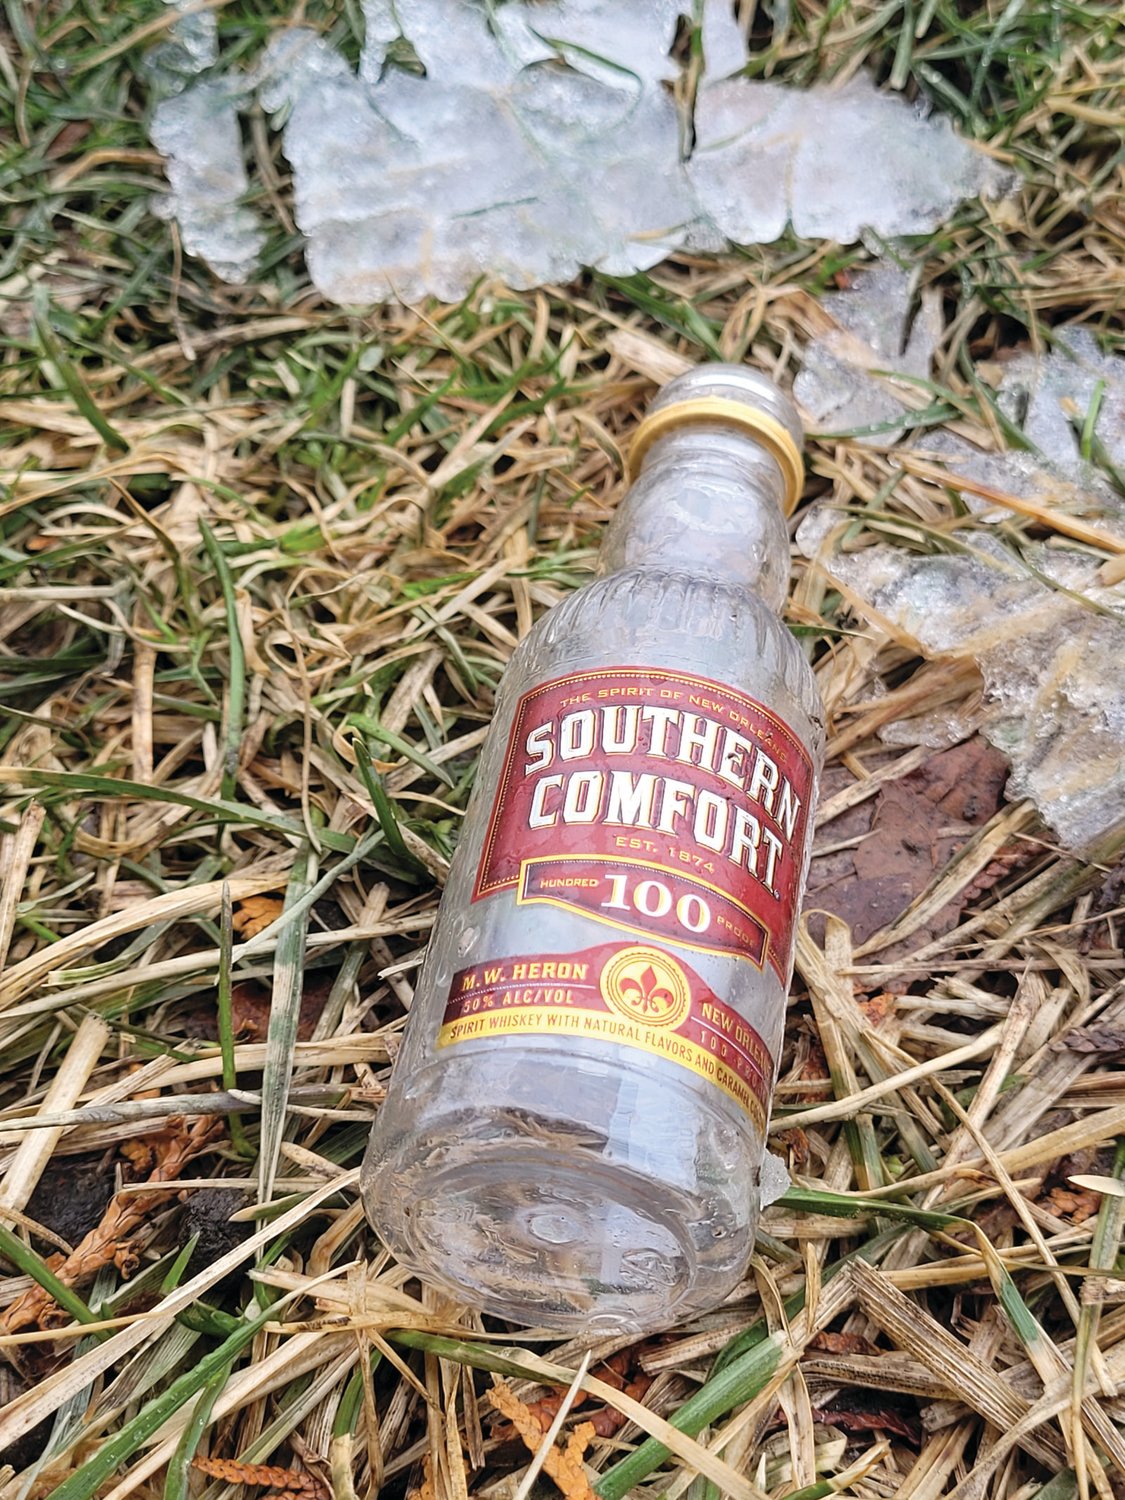 NORTHEASTERN DISCOMFORT: A tiny bottle of Southern Comfort emerged from the ice and snow in the grass along Atwood Avenue in Johnston, likely tossed from a car window.